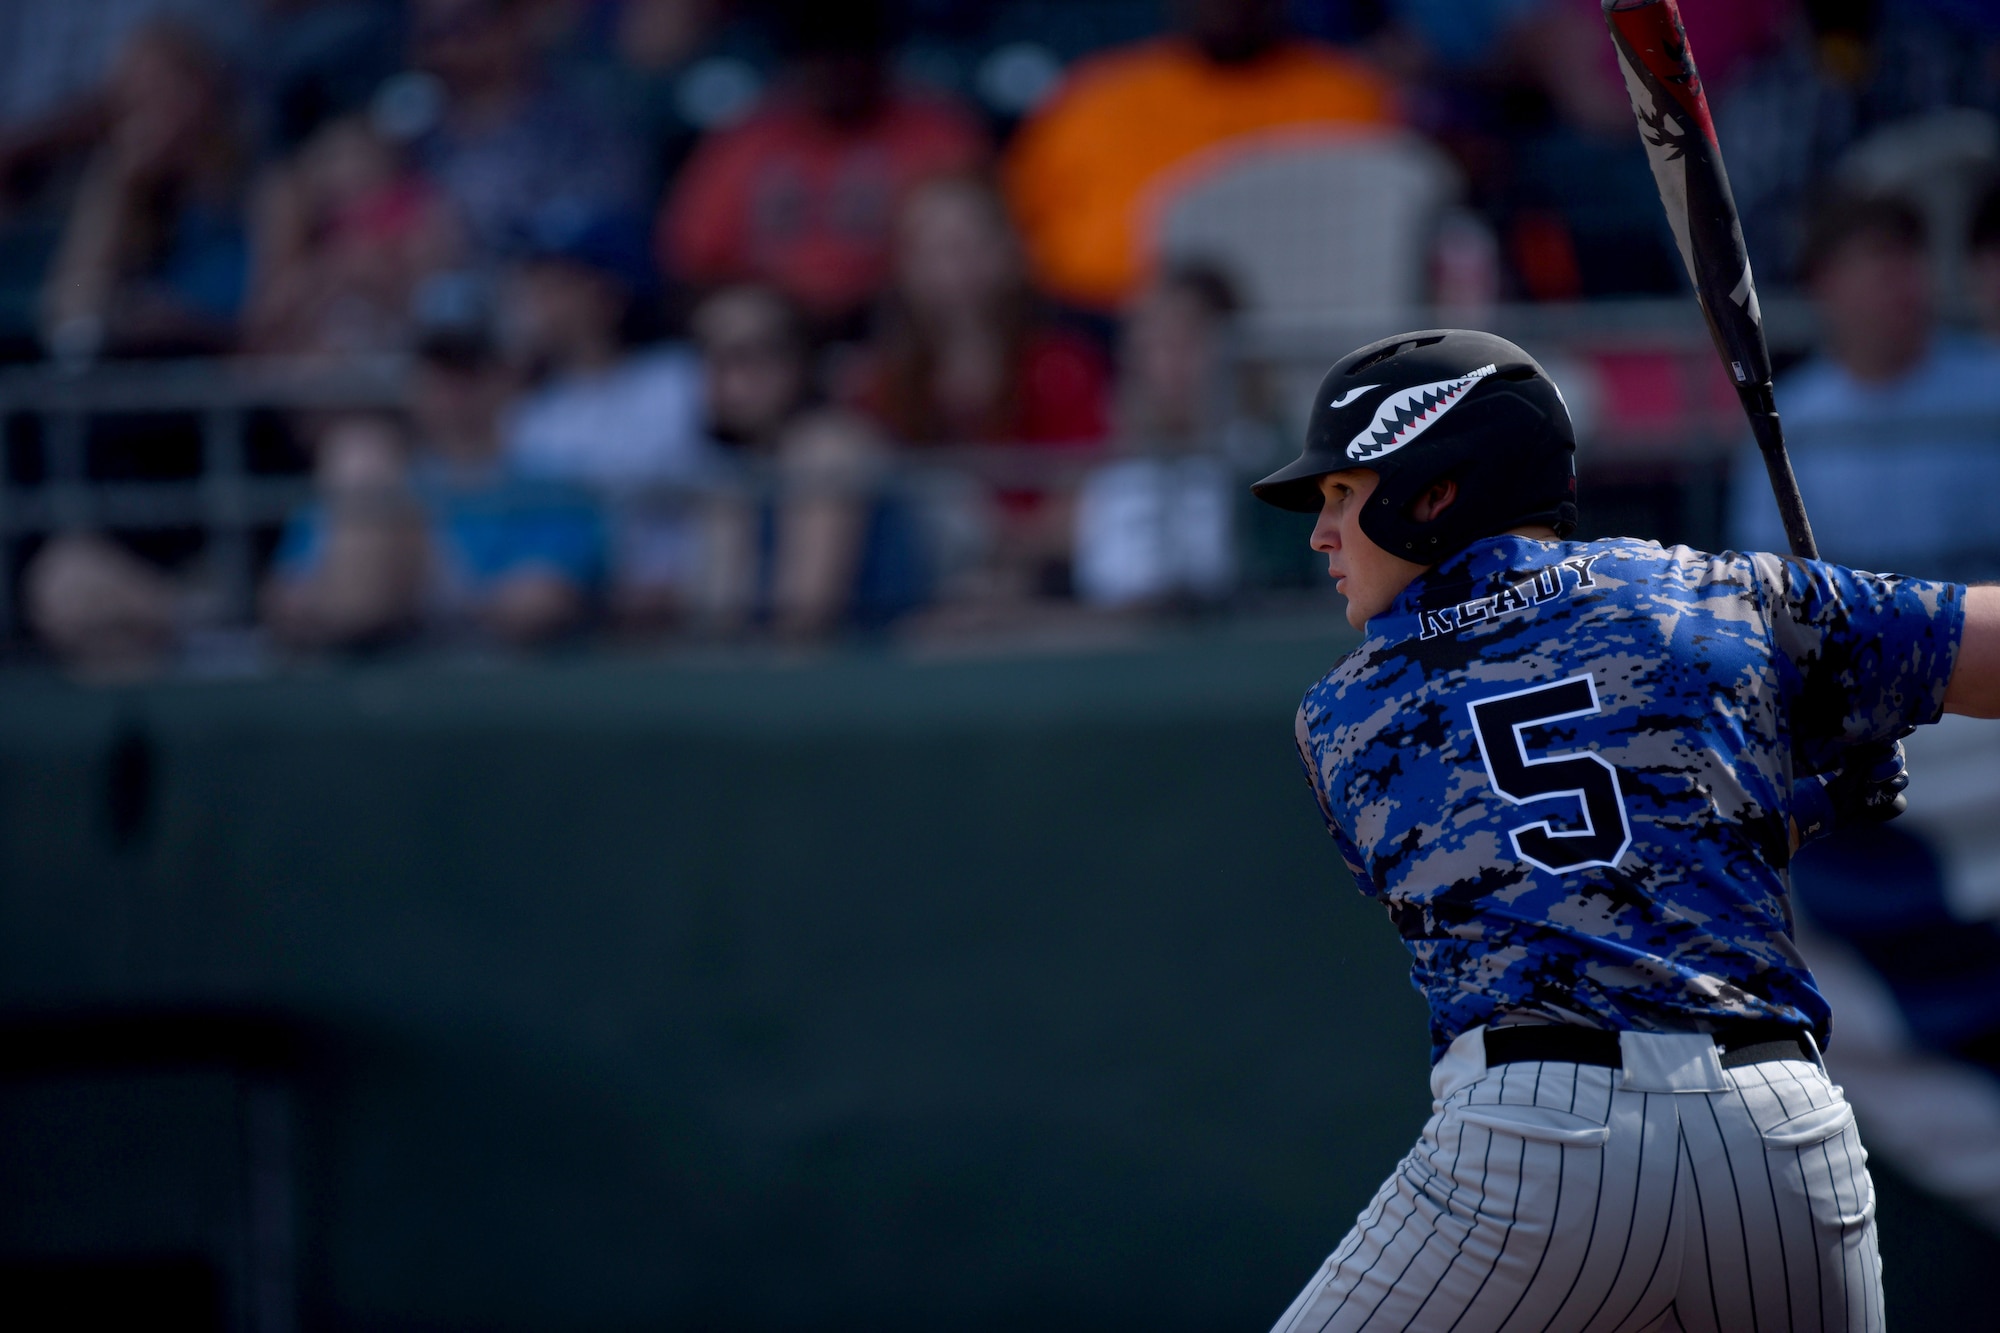 Nic Ready, U.S. Air Force Academy infielder, prepares to bat during the Freedom Classic baseball series Feb. 25, 2017 at Grainger Stadium in Kinston, North Carolina. More than 2,000 active duty members and their families were in attendance. (U.S. Air Force photo by Airman 1st Class Victoria Boyton)